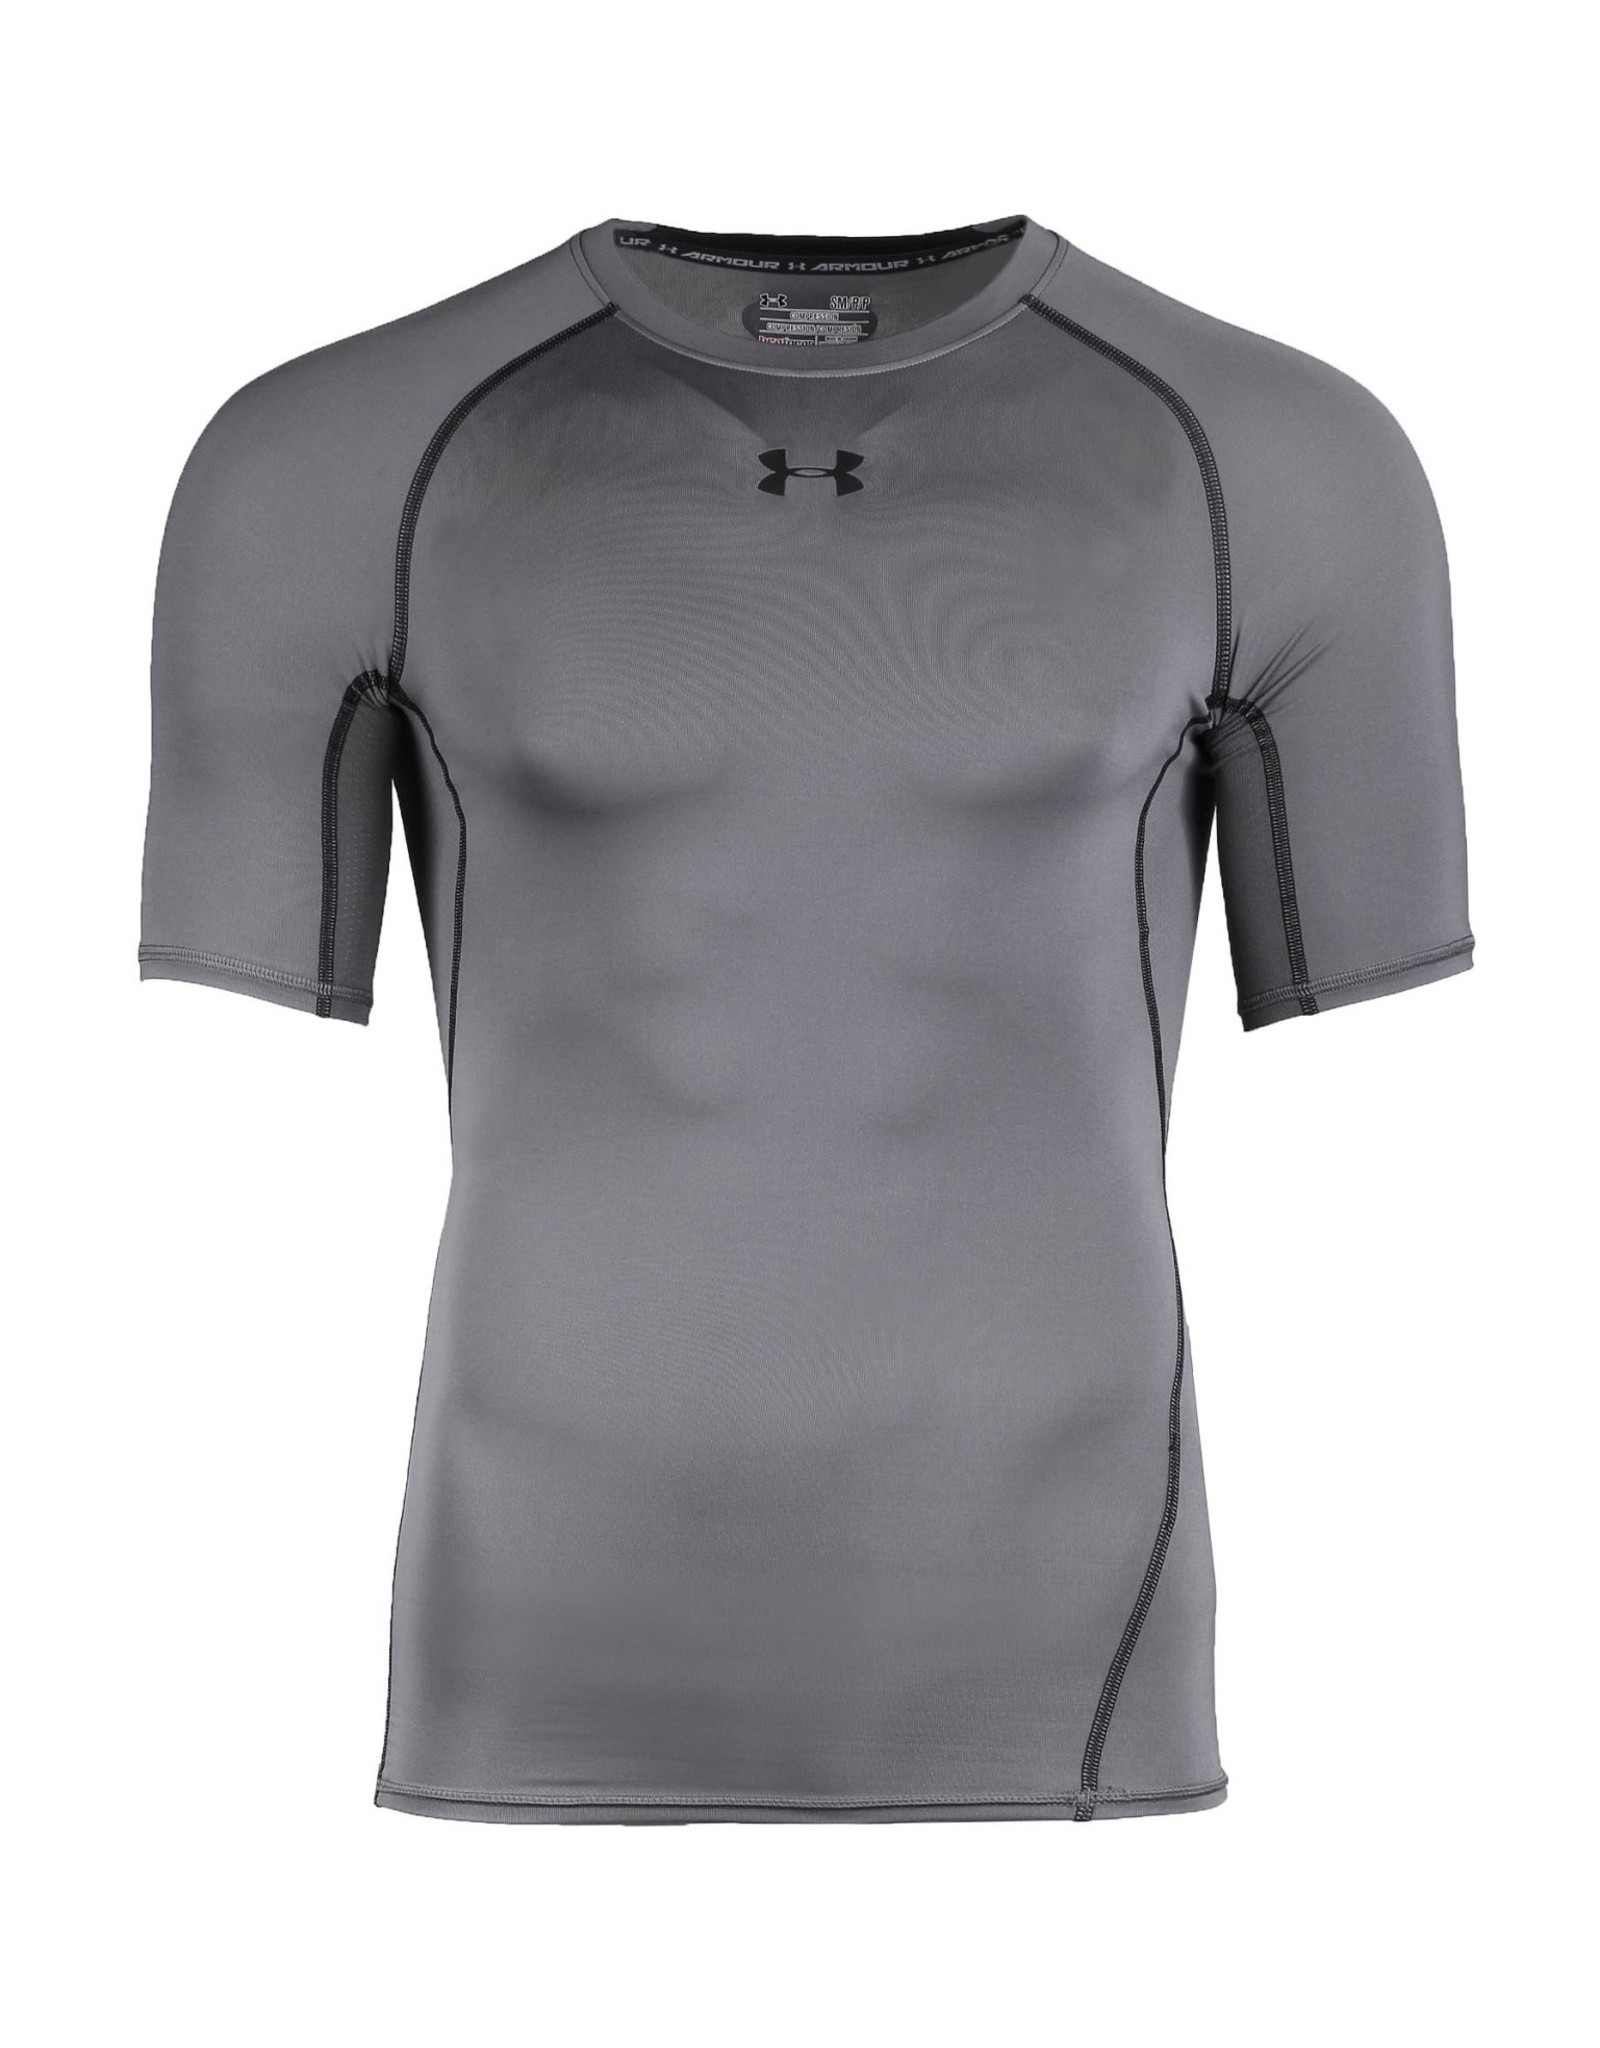 Under Armour UA Hommes/Hombres Tee